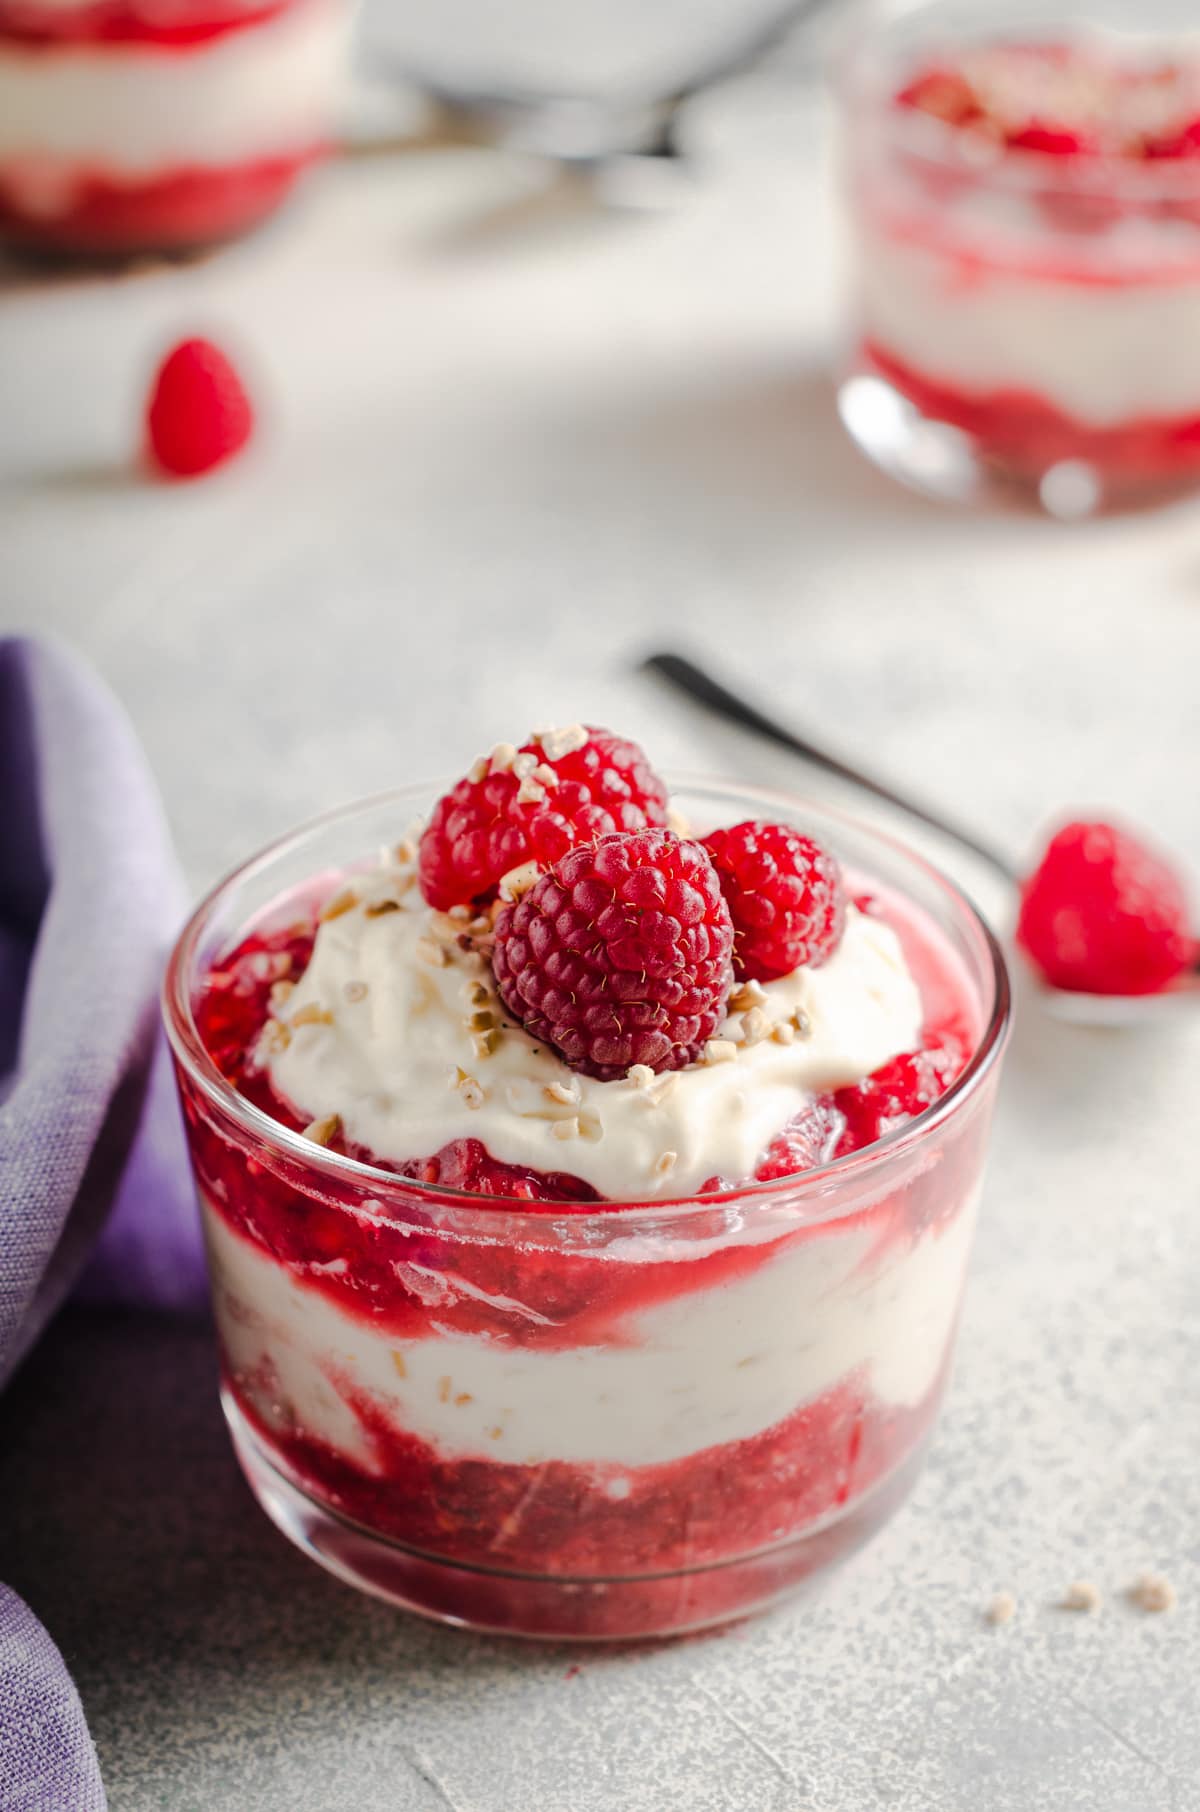 A Scottish Traditional Cranachan layered in a glass serving dish, made with fresh Scottish raspberries, toasted Scottish pinhead oatmeal, and whipped cream with whisky and heather honey.